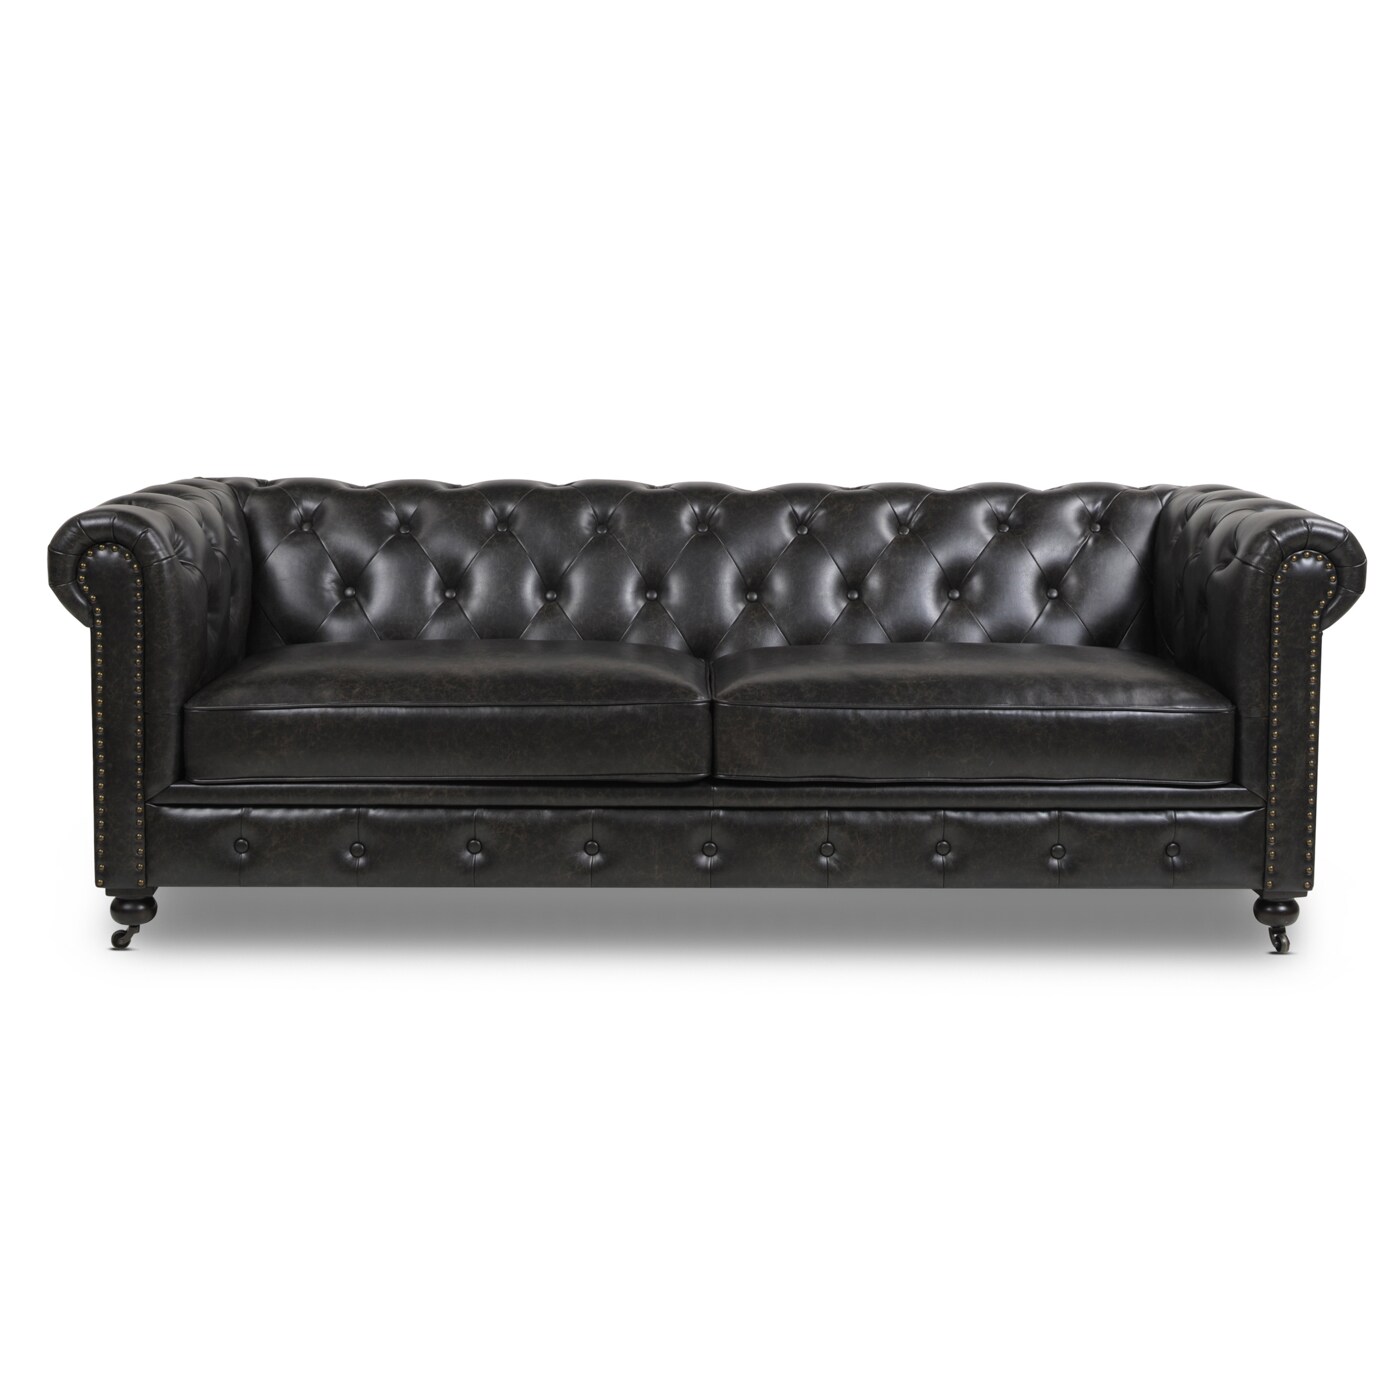 Sofas Loveseats Department At, Black Leather Tufted Couch